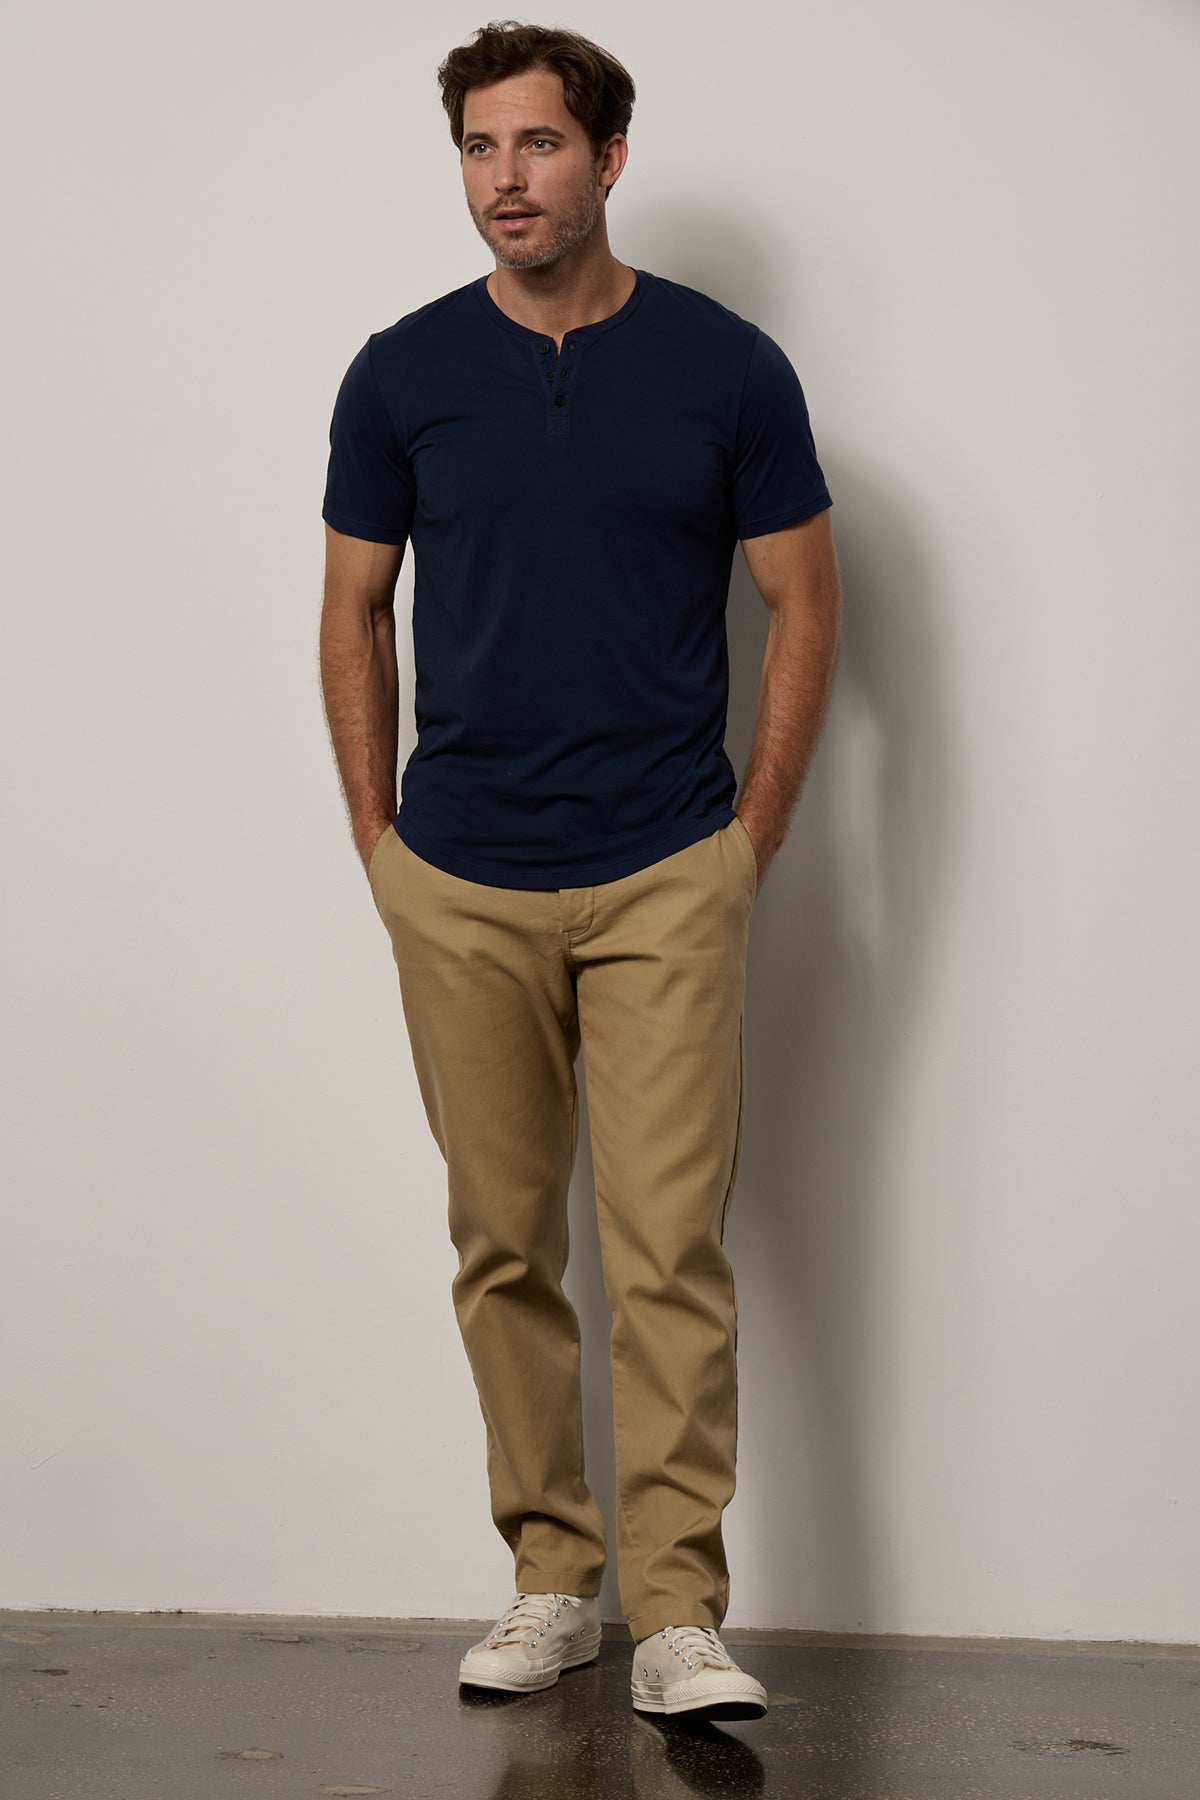 Fulton Short Sleeve Henley in midnight with Aiden pant in khaki full length front with Converse-26079171707073